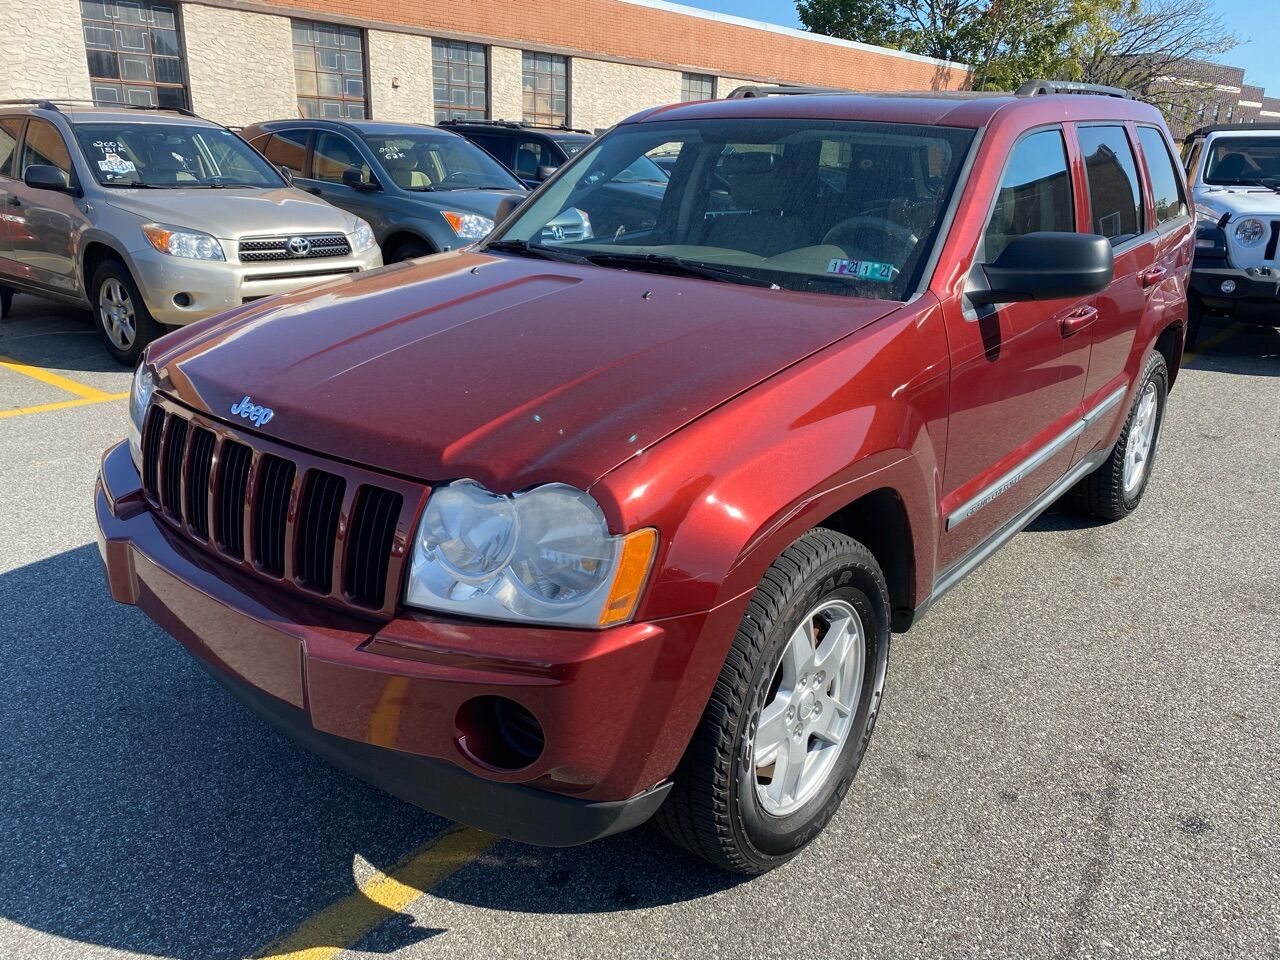 2007 Jeep Grand Cherokee for Sale in Miller Place, NY